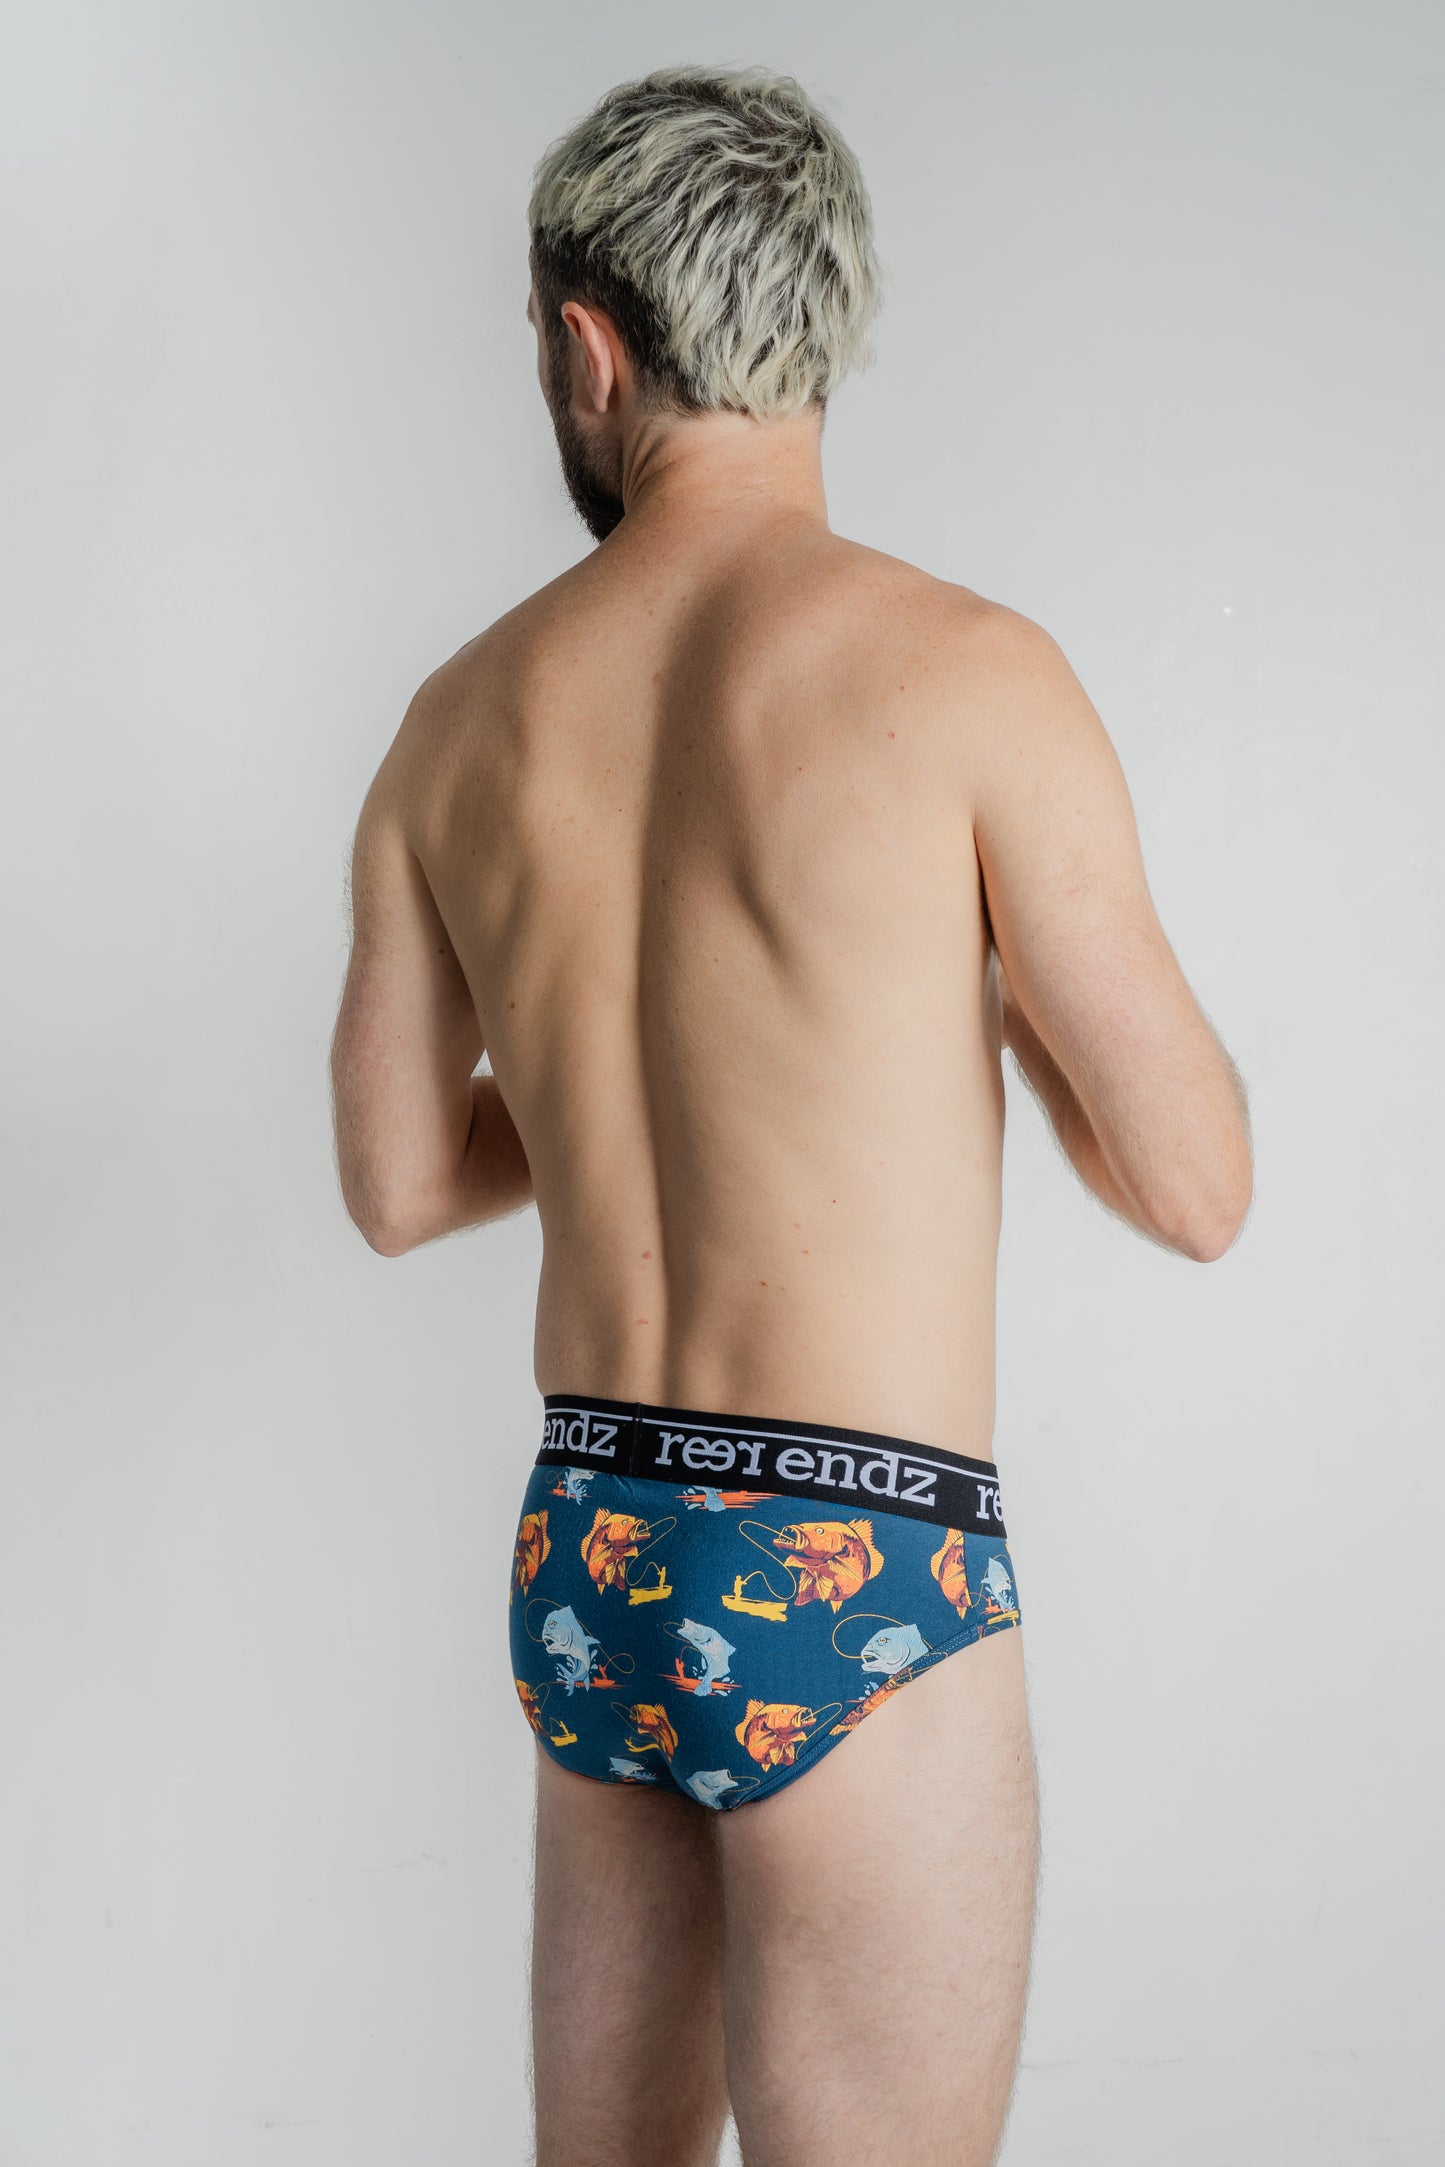 Experience comfort and sustainability with Reer Endz men's briefs in the trendy Hooked Print, expertly crafted from Organic Cotton, as seen on our male model.